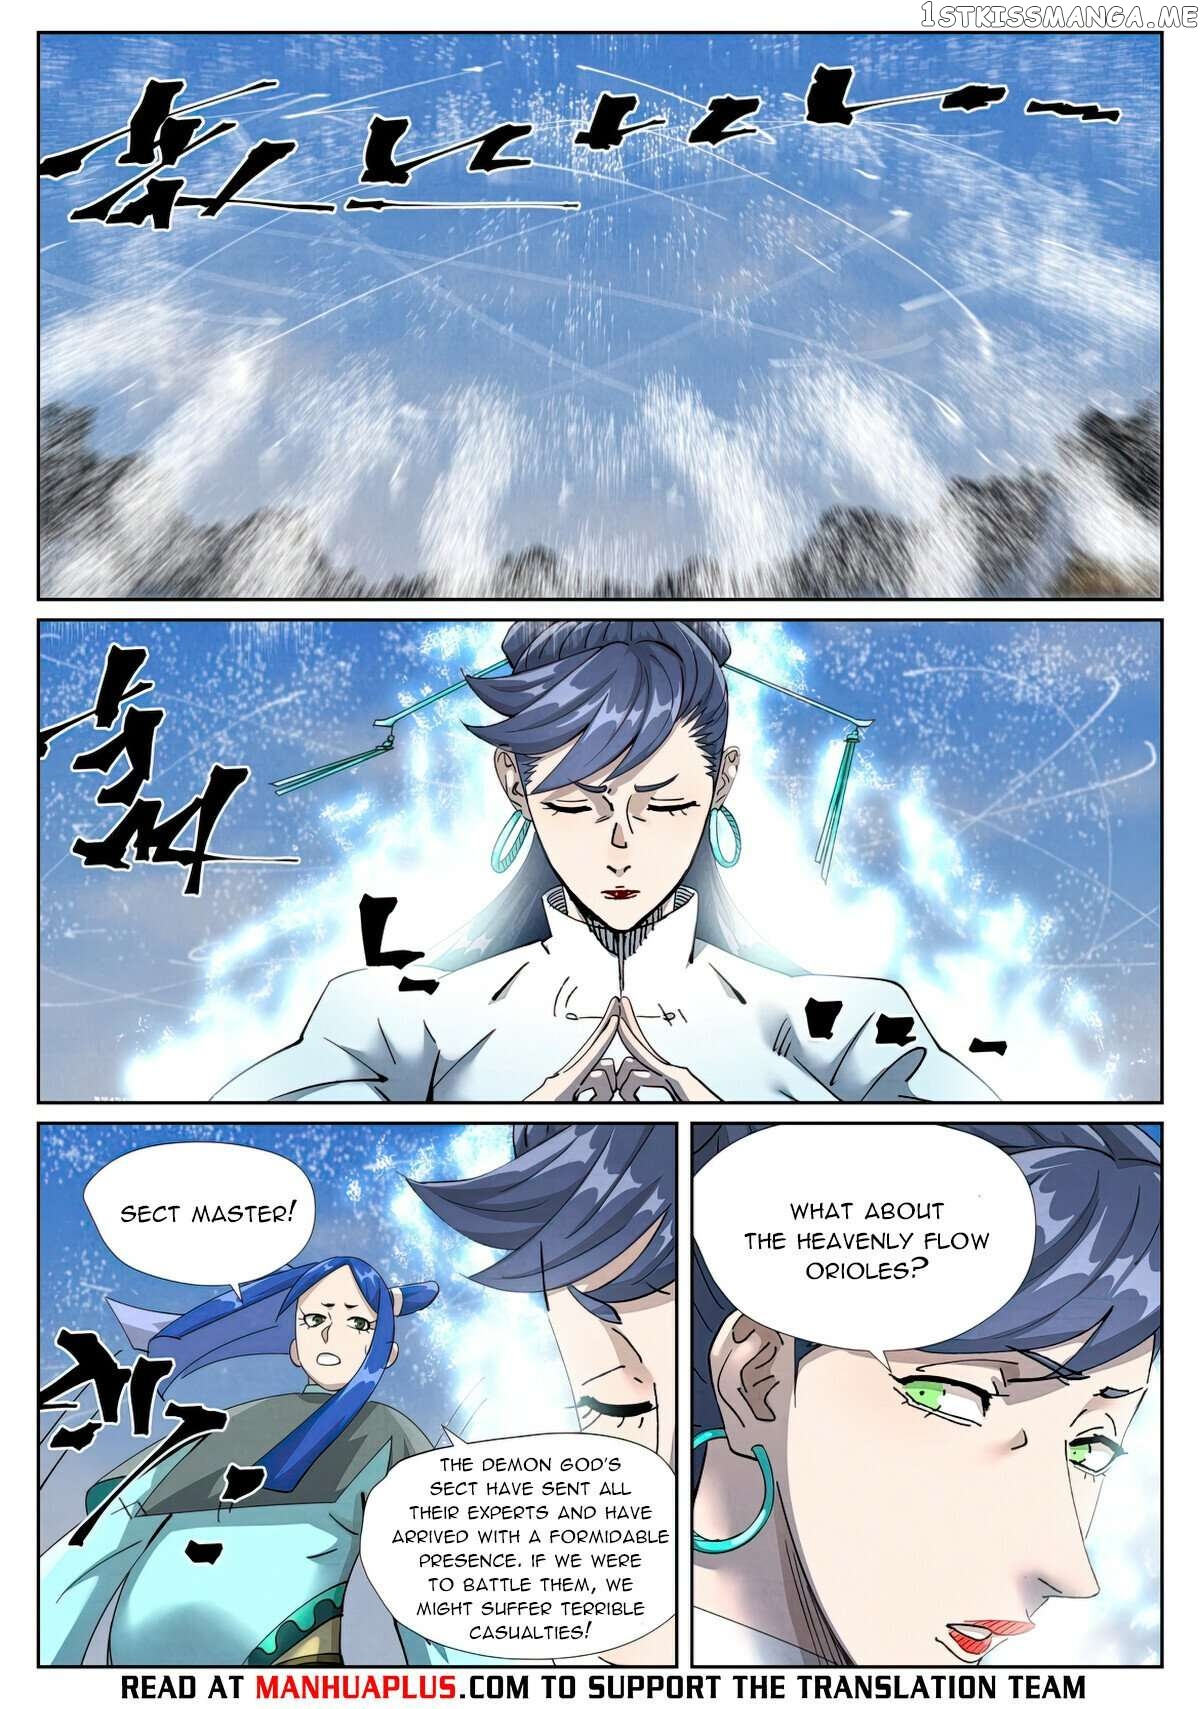 Tales of Demons and Gods Manhua Chapter 438.6 - Page 7